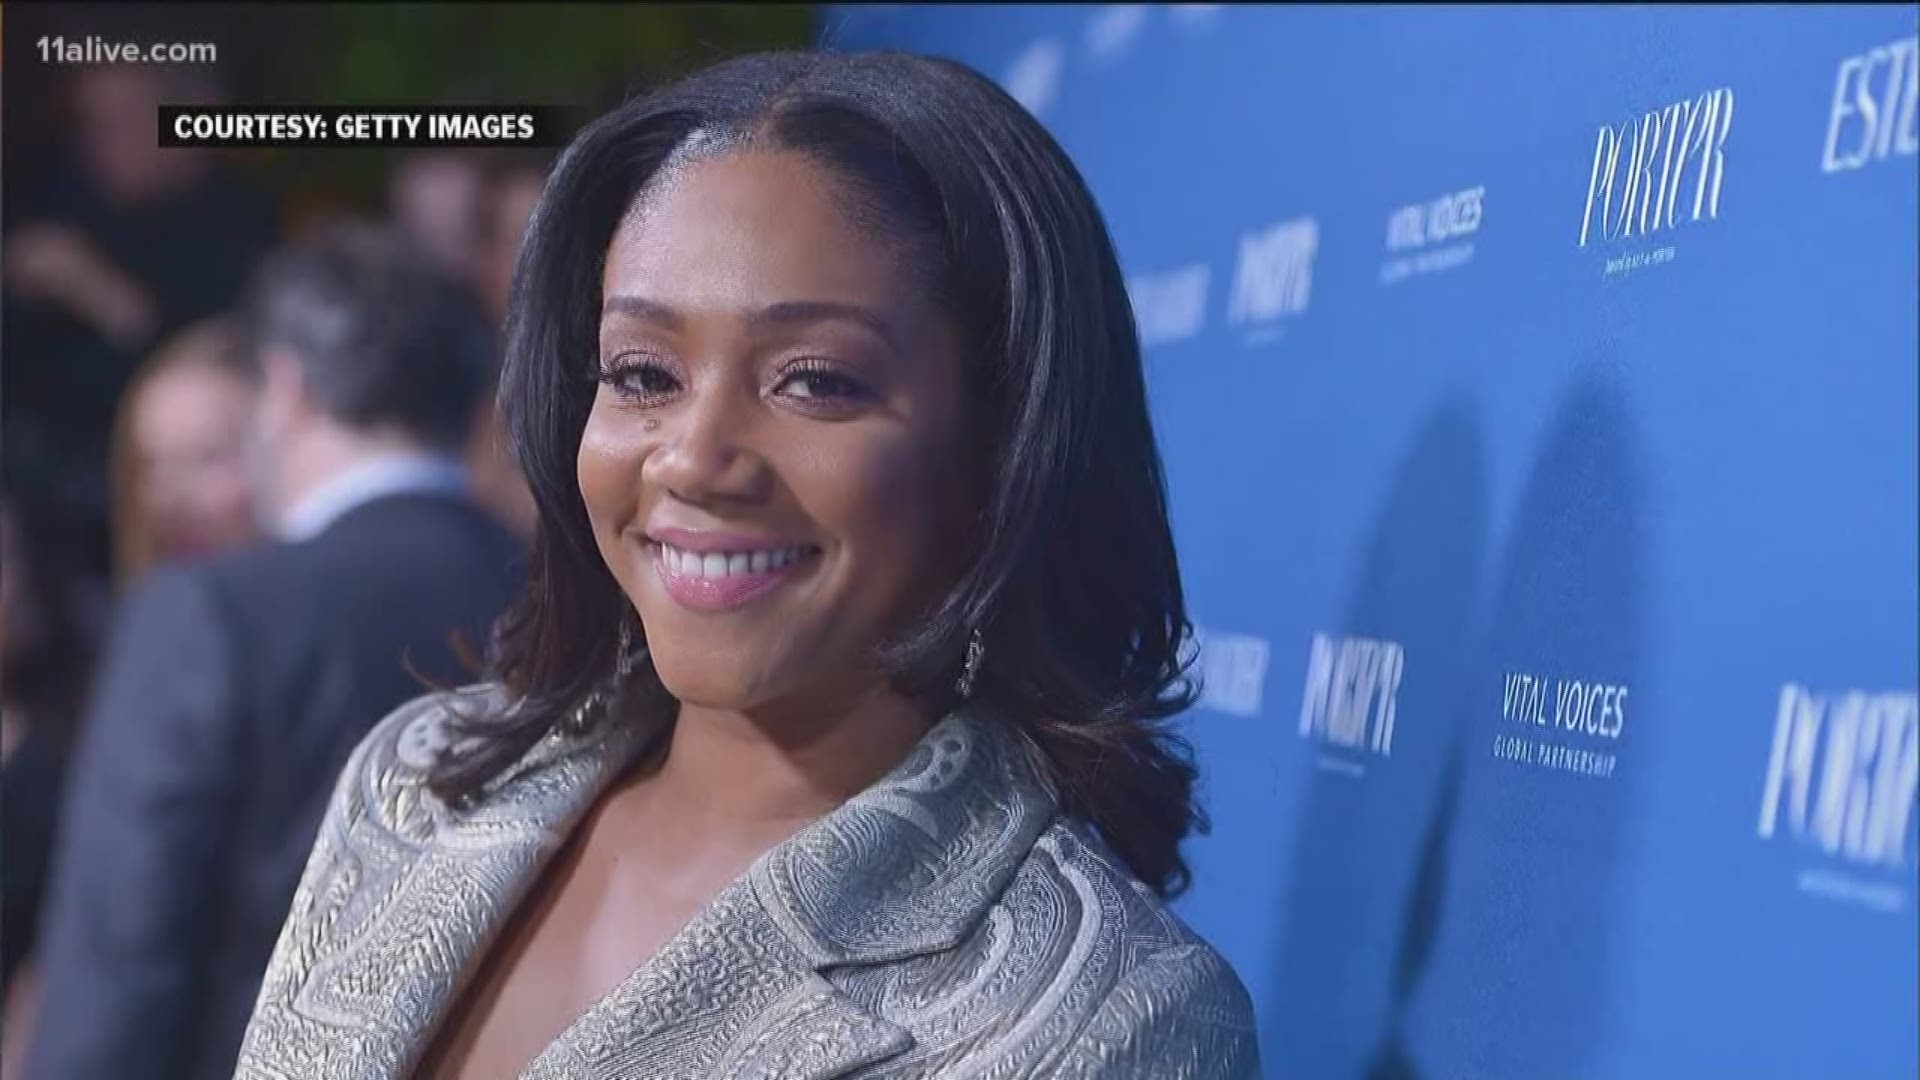 Like a Boss trailer features Byrne, Haddish | 11alive.com